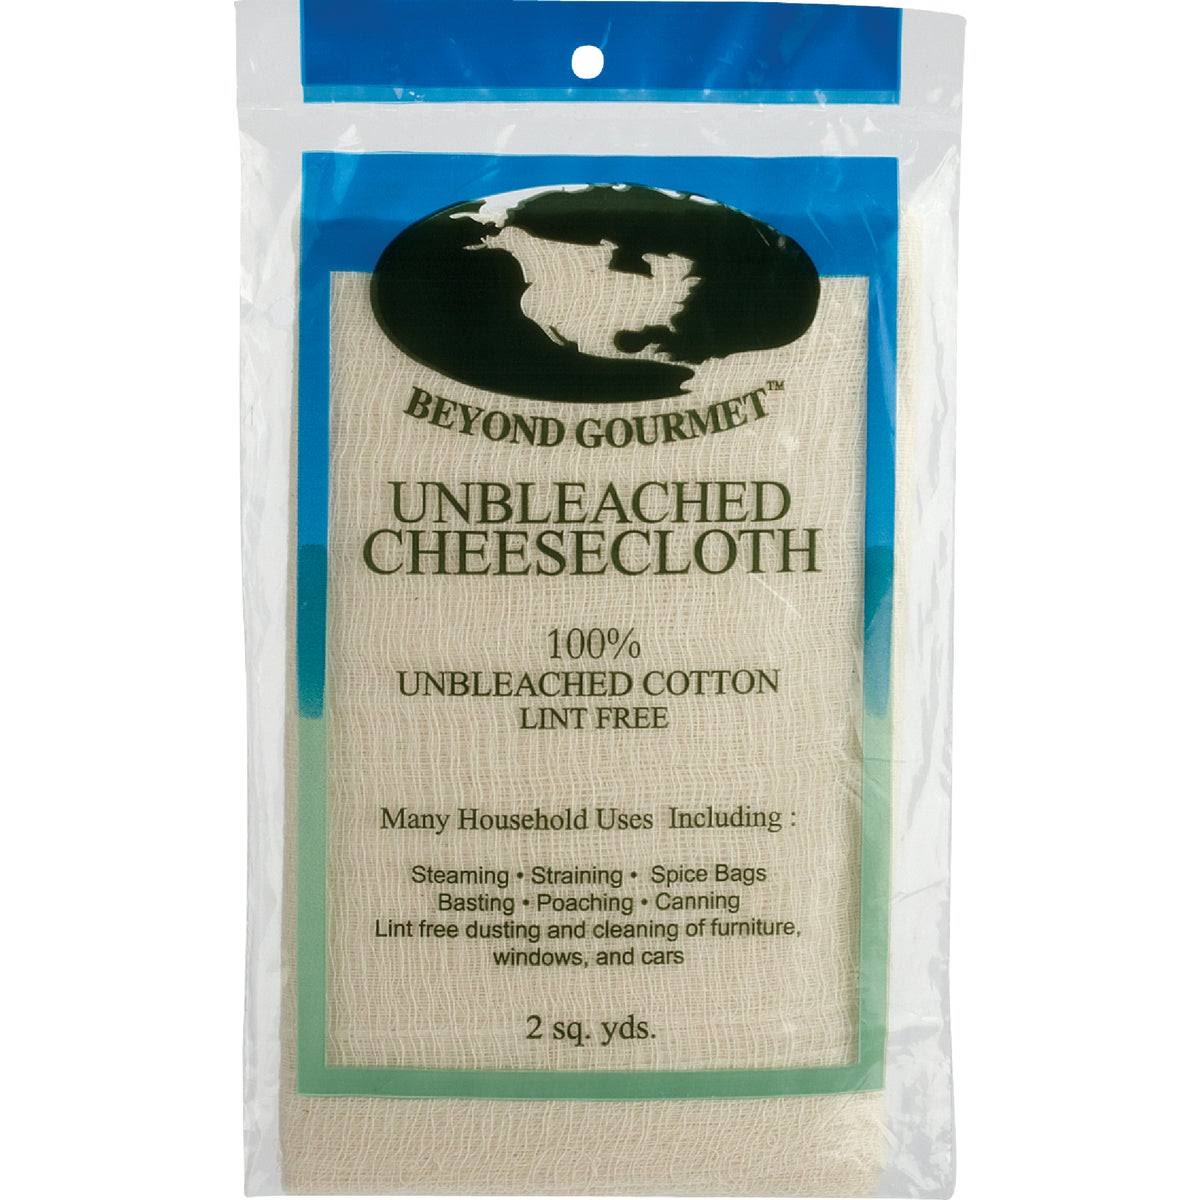 Beyond Gourmet Unbleached Cheesecloth - 2sq. yds